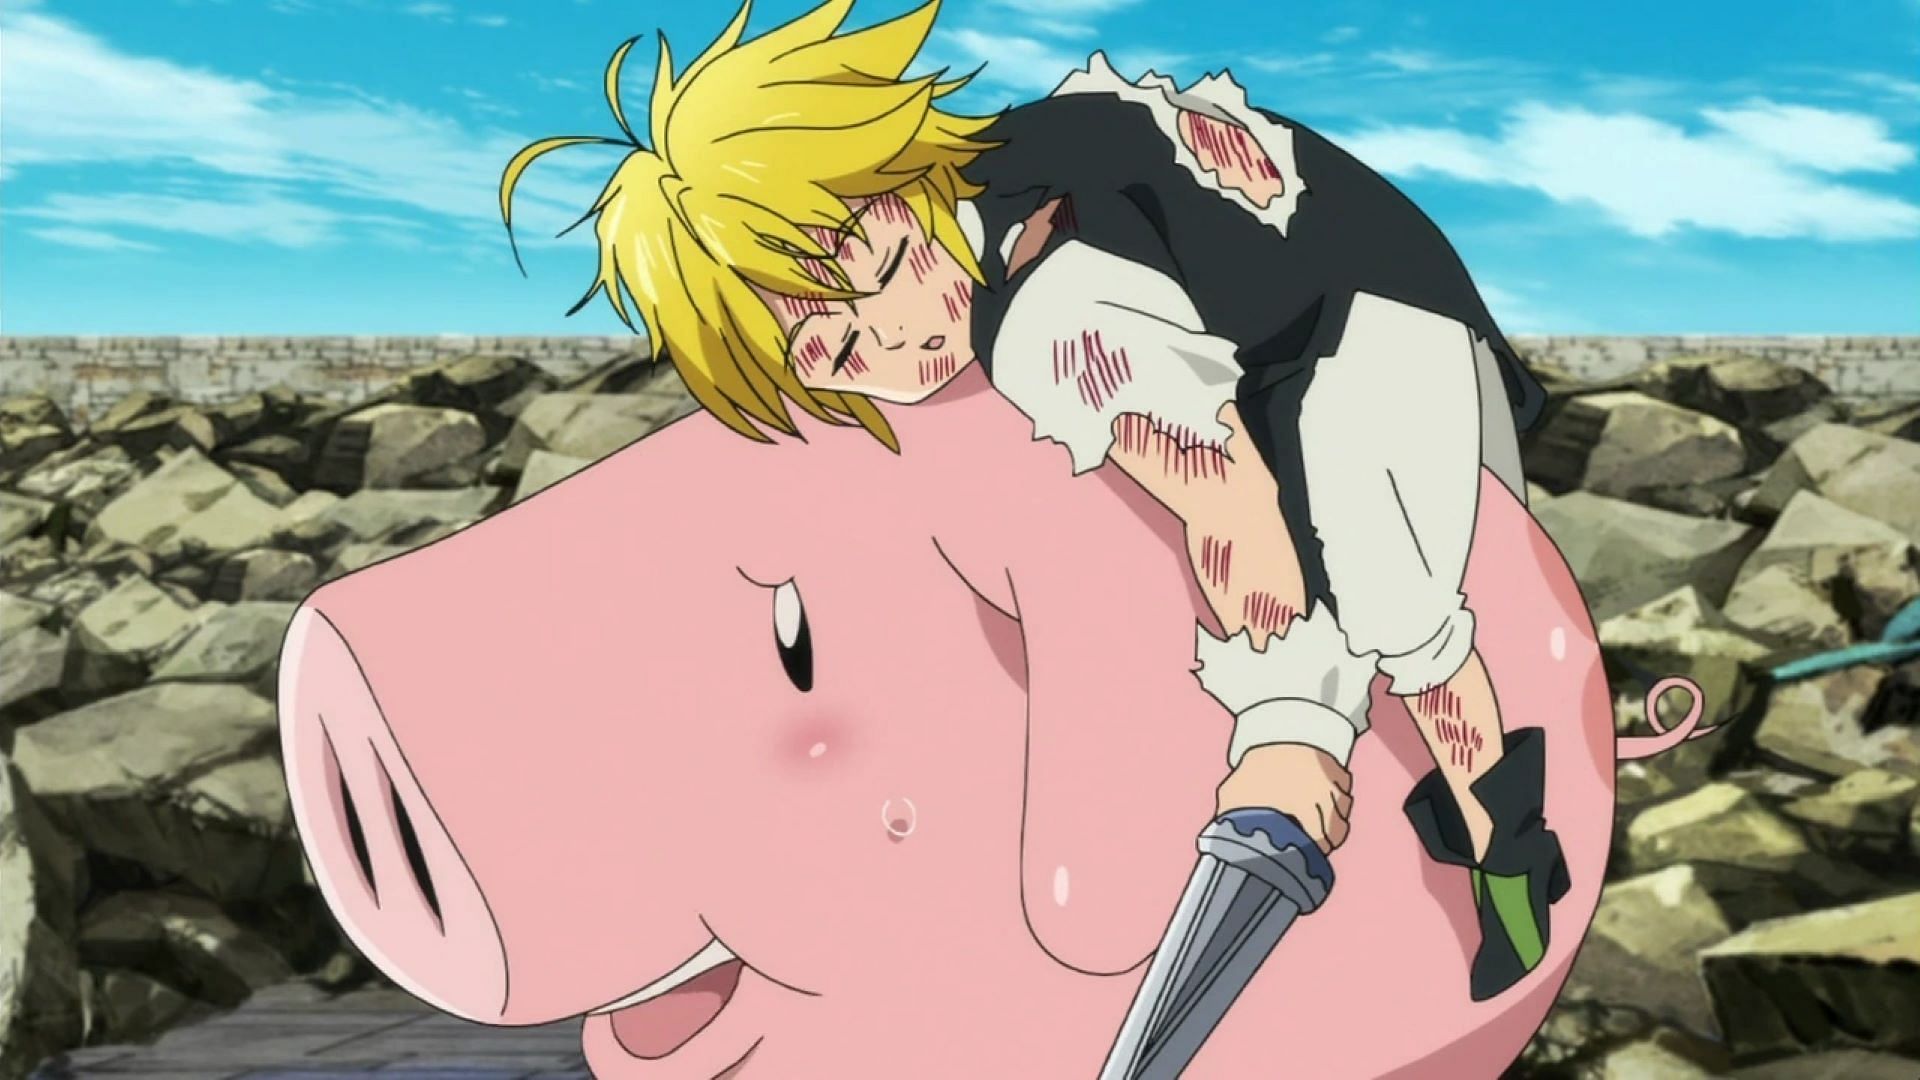 Hawk and Meliodas in Seven Deadly Sins (Image via A-1 Pictures)